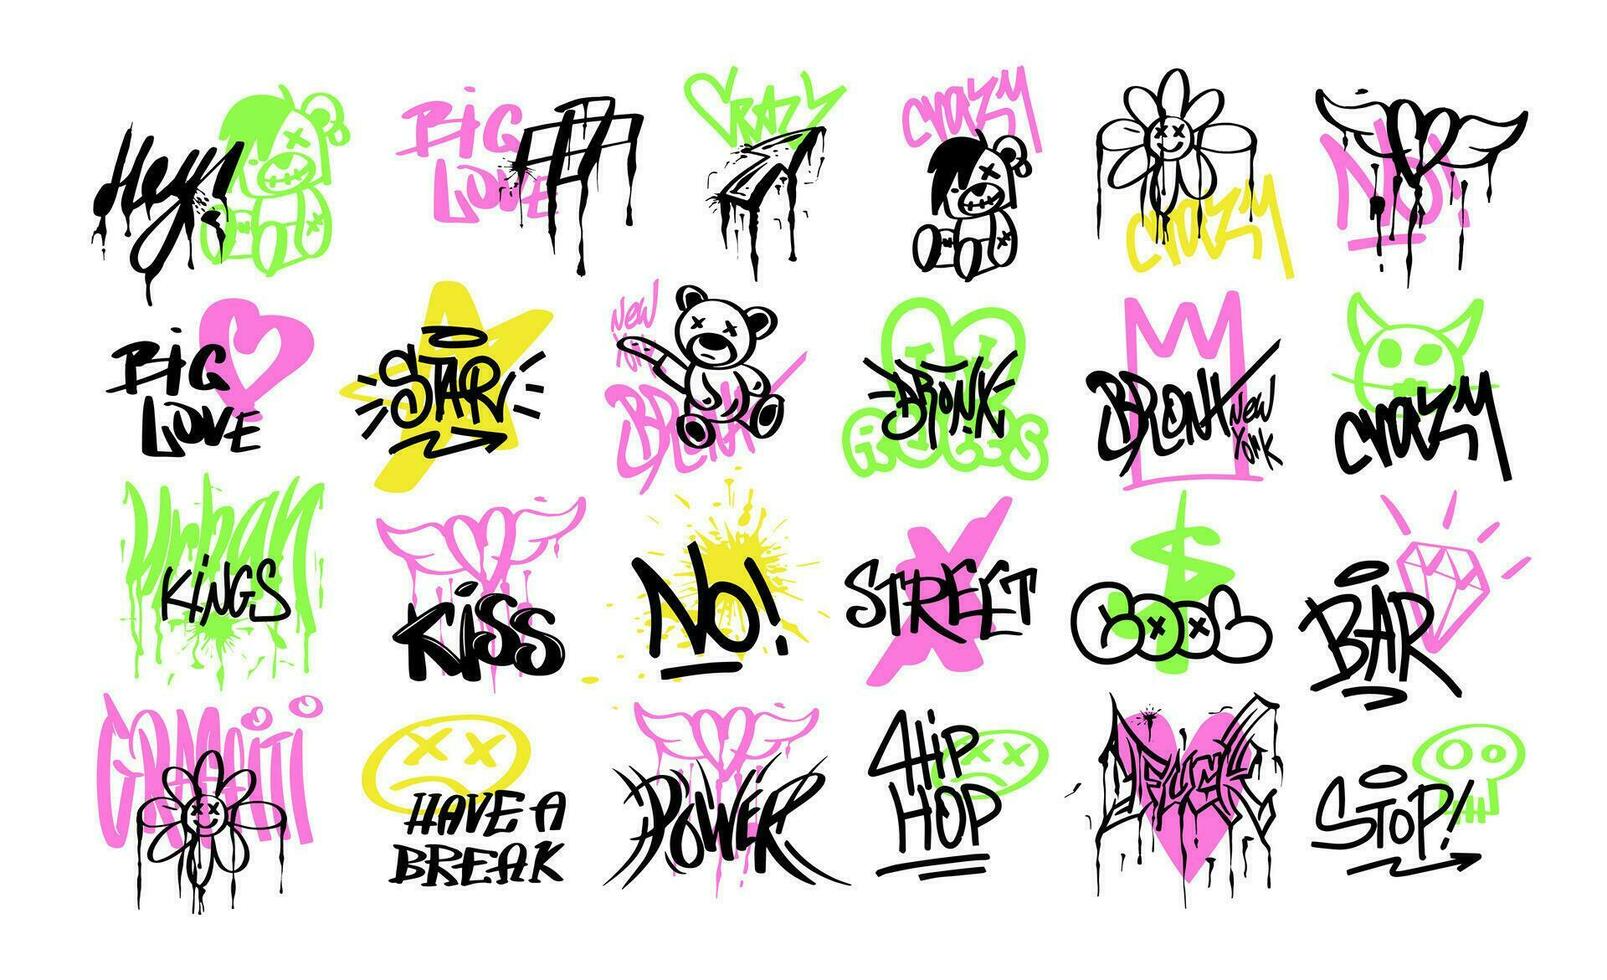 A set of modern graffiti for transferable temporary tattoos. Street art in the grunge style with lettering. Vector illustration for printing